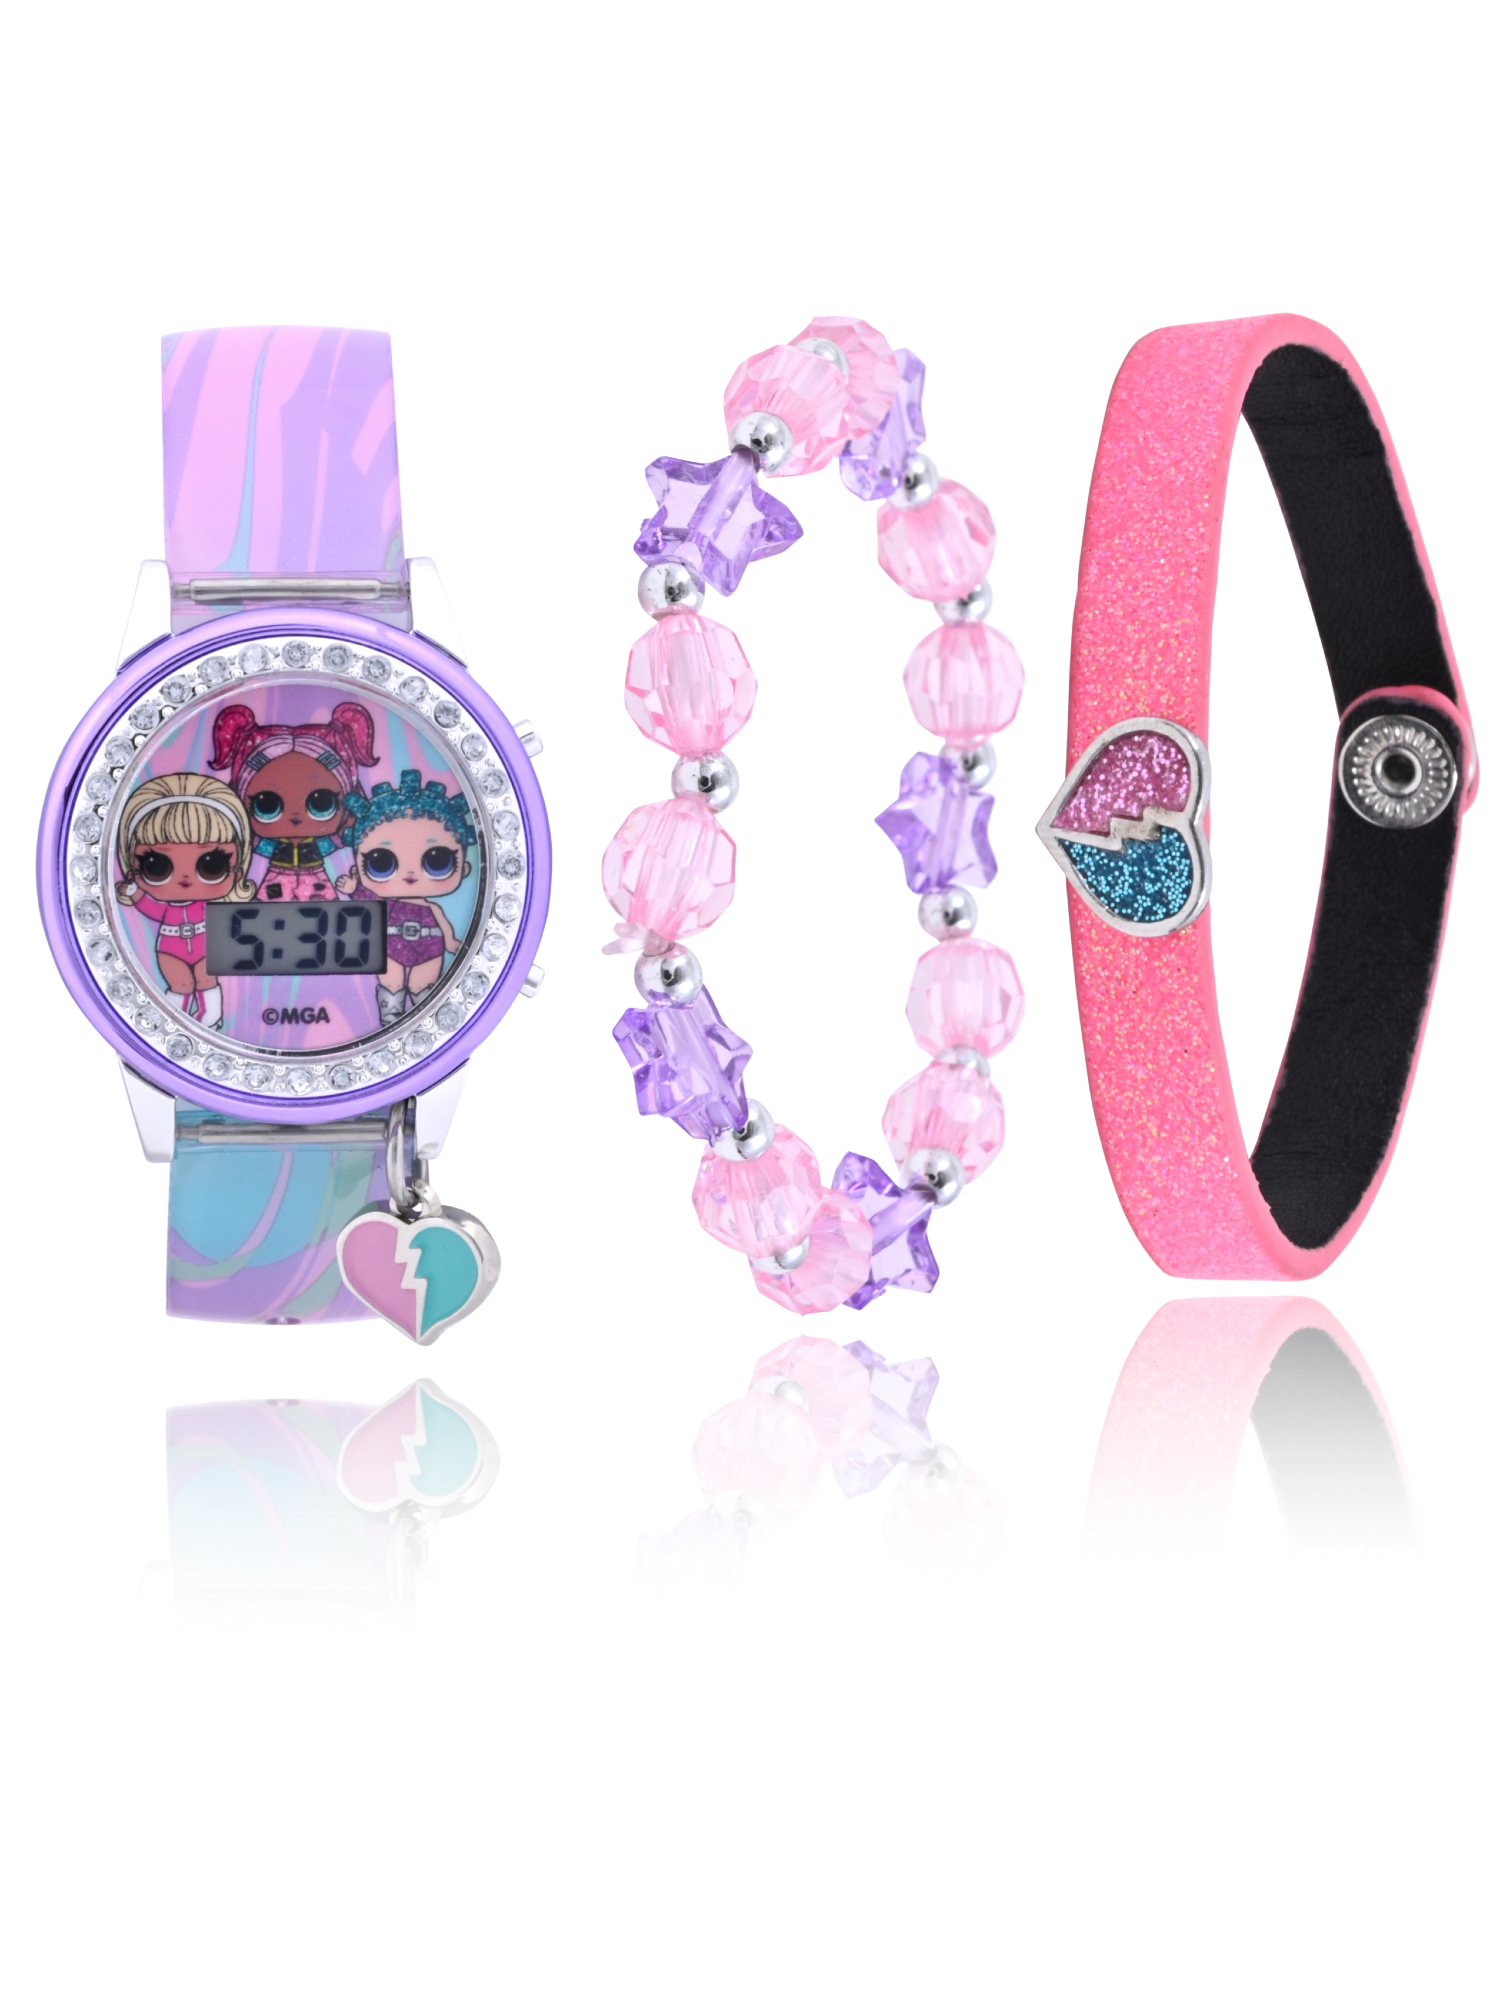 MGM Entertainment LOL Surprise! Girl's Flashing LCD Ombre Silicone Watch & Matching Bracelets 3 Piece Set - image 1 of 7